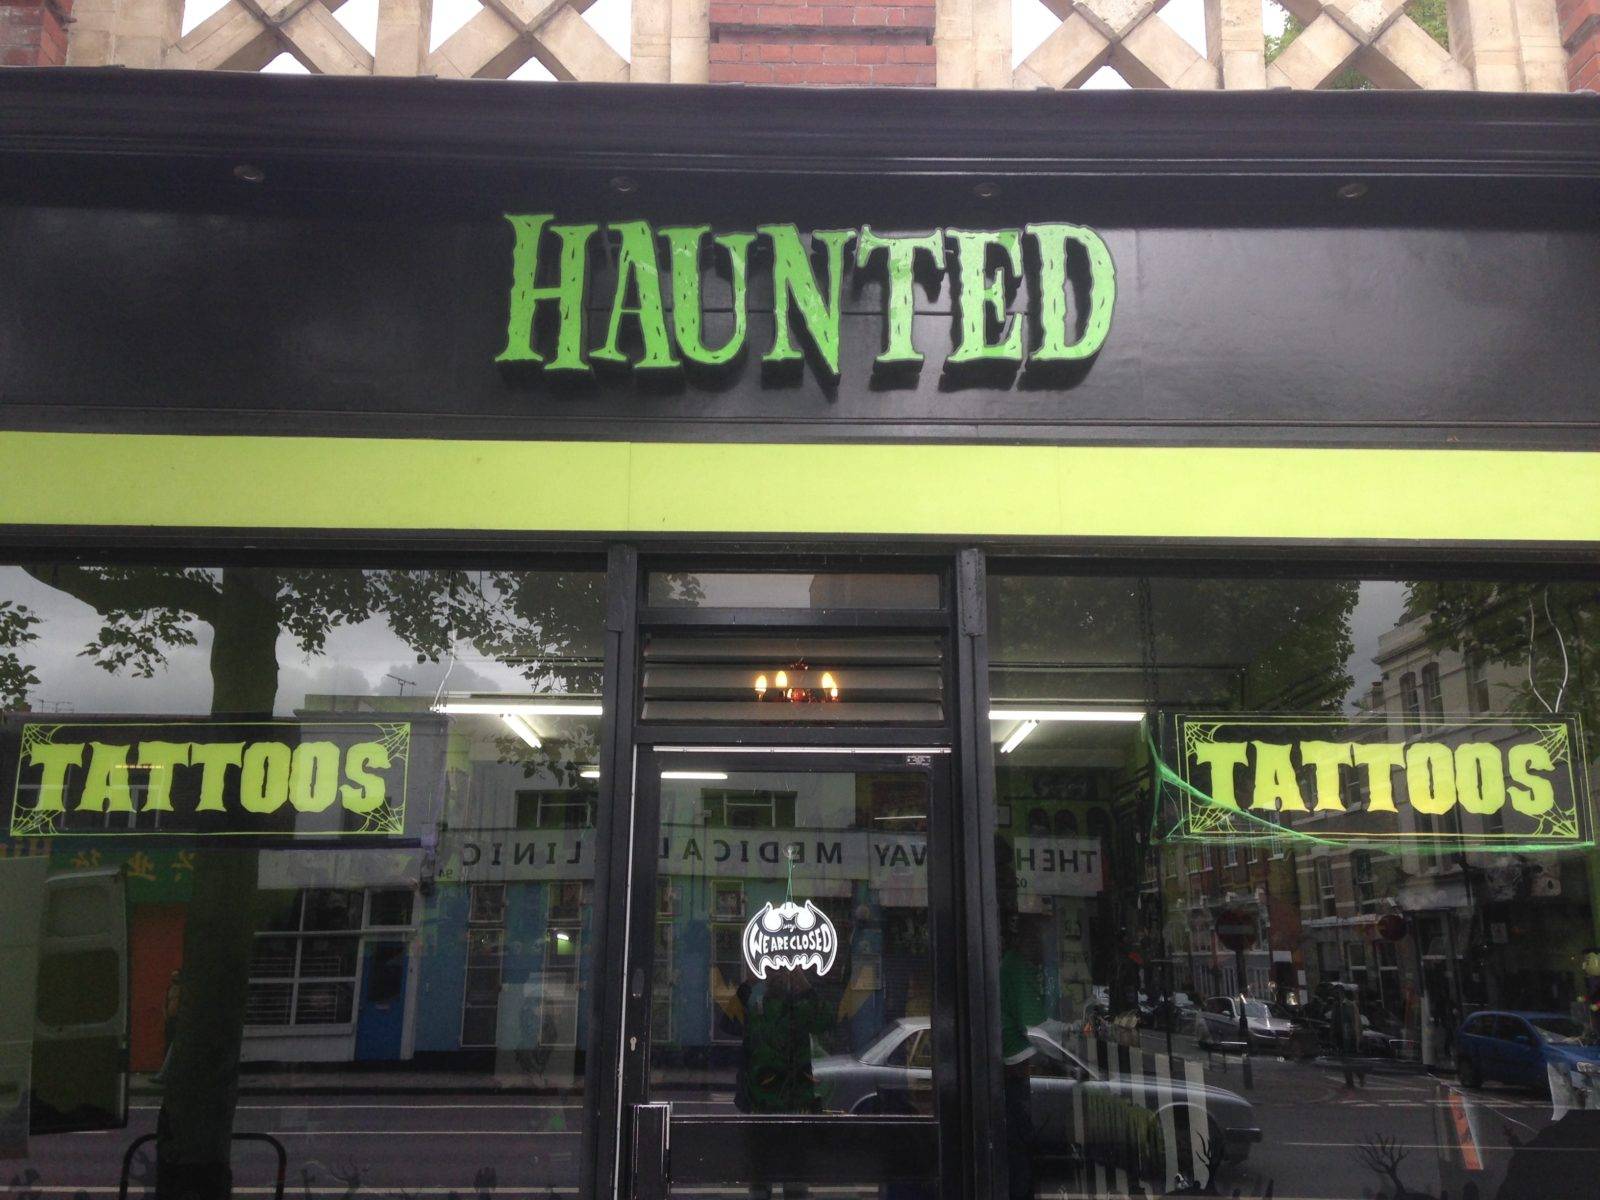 Haunted - Retail Shop Sign